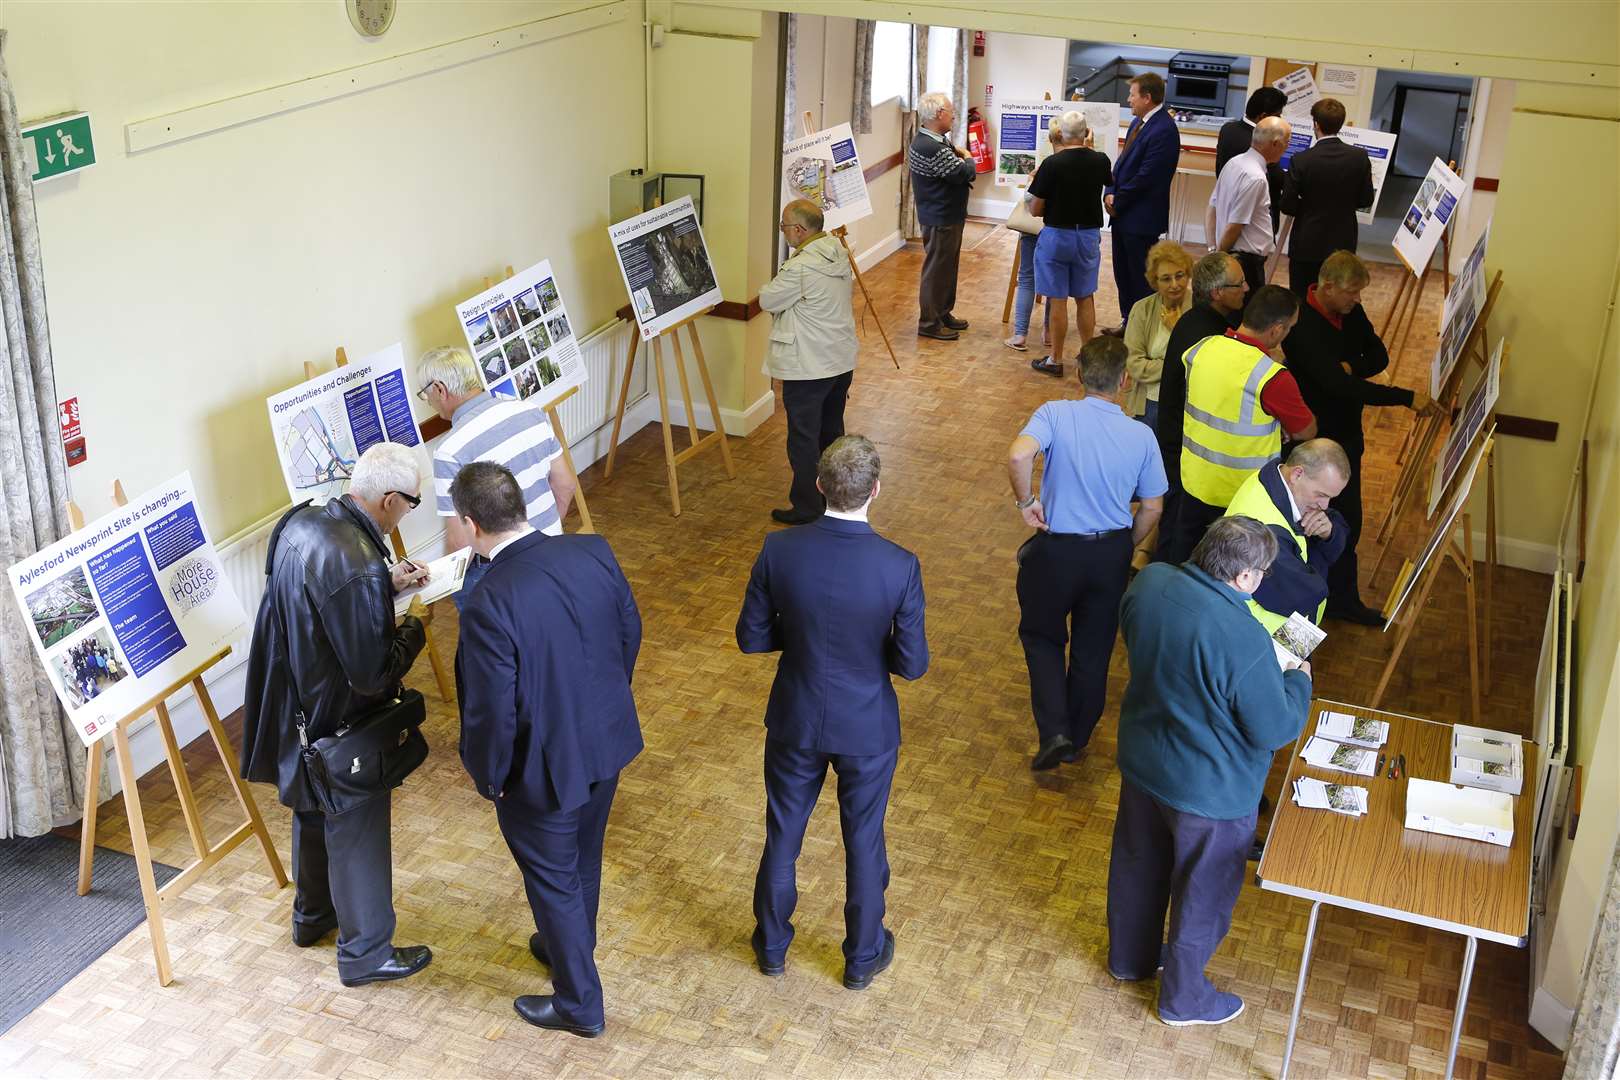 The exhibition, with latest plans for the former Aylesford Newsprint site